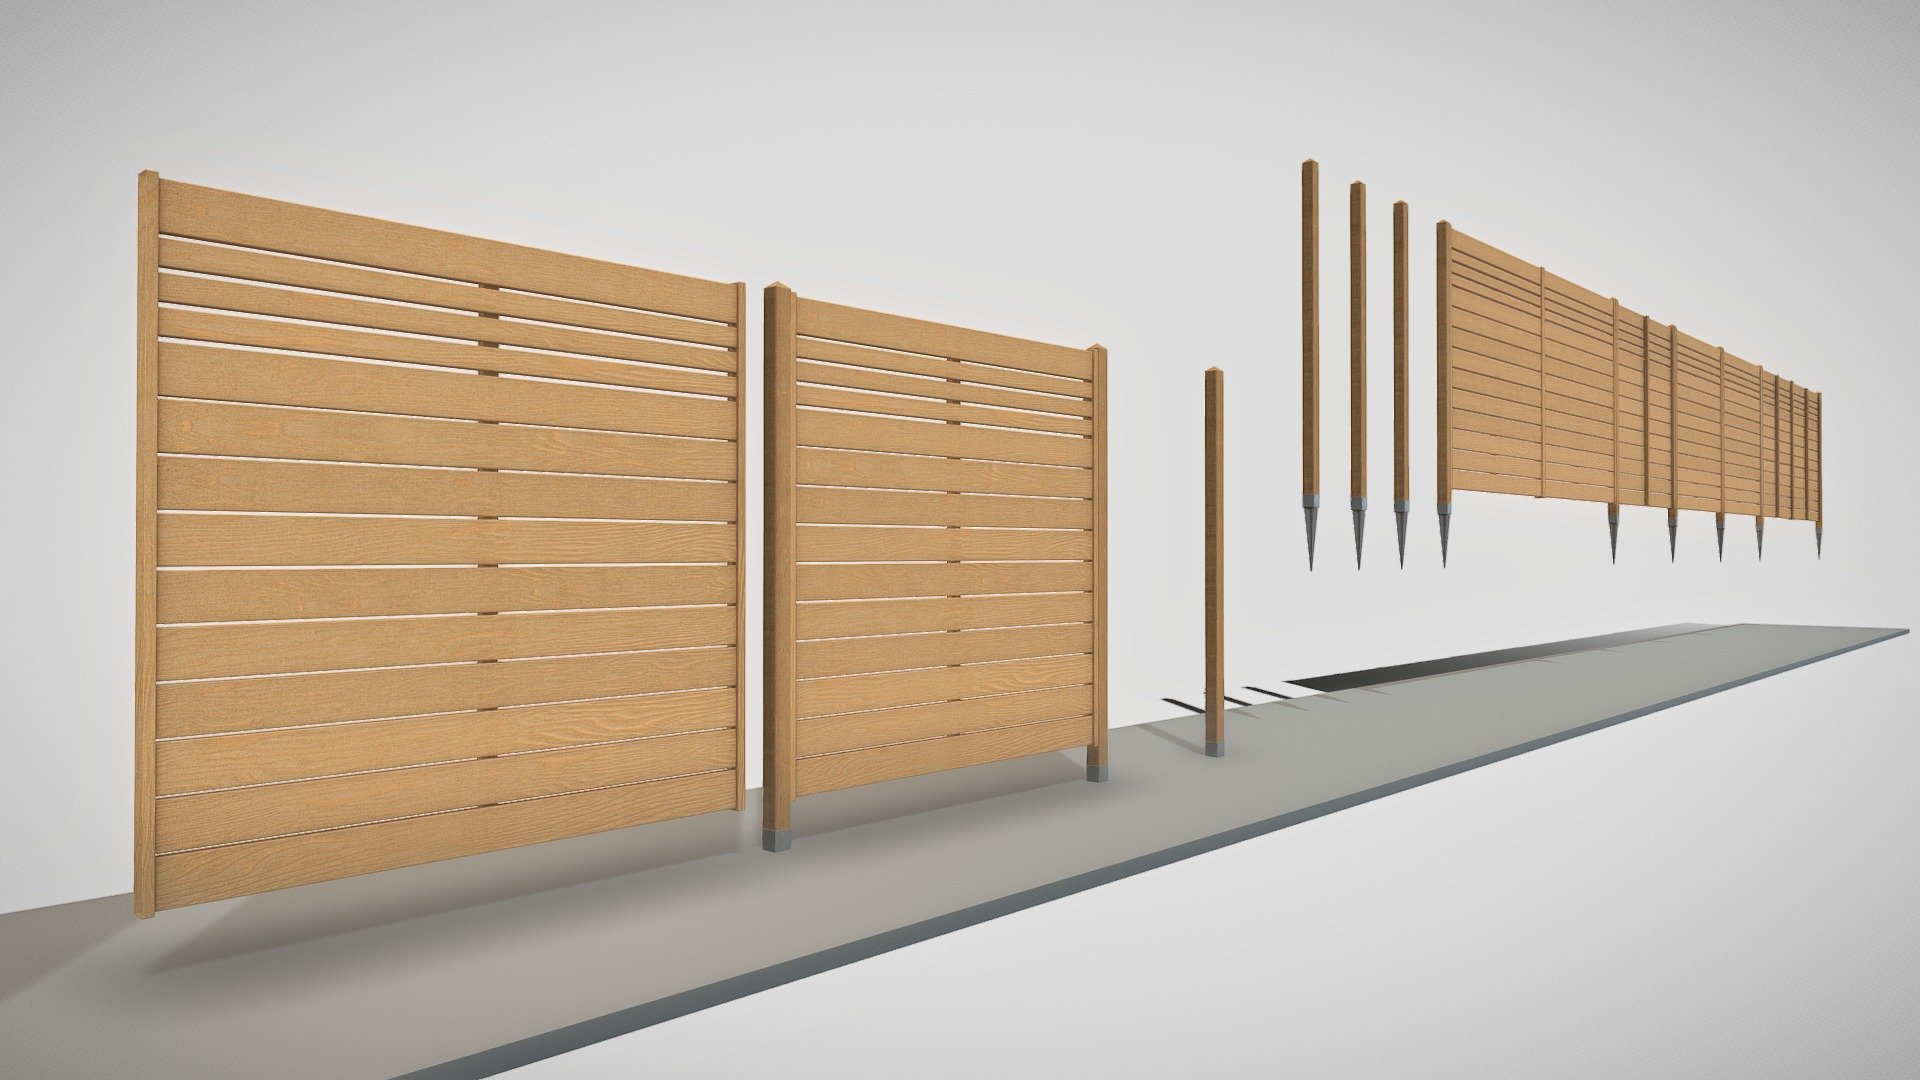 Modular wood fence 2 remastered version.




Object Name - Modular_Wood Fence_2 

1.942m x 0.076m x 2.366m

Polygons = 1332






Object Name - Modular_Wood Fence_2_Pole 

0.072m x 0.072m x 2.366m

Polygons = 502






Object Name - Modular_Wood Fence_2_Mid 

1.803m x 0.071m x 1.800m

Polygons = 328






Object Name - Modular_Wood Fence_2_Pole_L 

1.873m x 0.076m x 2.366m

Polygons = 830






Object Name - Modular_Wood Fence_2_Pole_R 

1.873m x 0.076m x 2.366m

Polygons = 830






Object rotation and location is 0, scale is 1.000 x 1.000 x 1.000

Object center point is where it should be, so you can place the object easily on your ground



Texture map types (4K and 8-K): 




Base Color

Normal

Metalness

Roughness



Last update:
17:03:07  23.11.21






3d modeled, textured and animated by 3DHaupt in Blender-3D.



The support is guaranteed if you have problems with the product 3d model